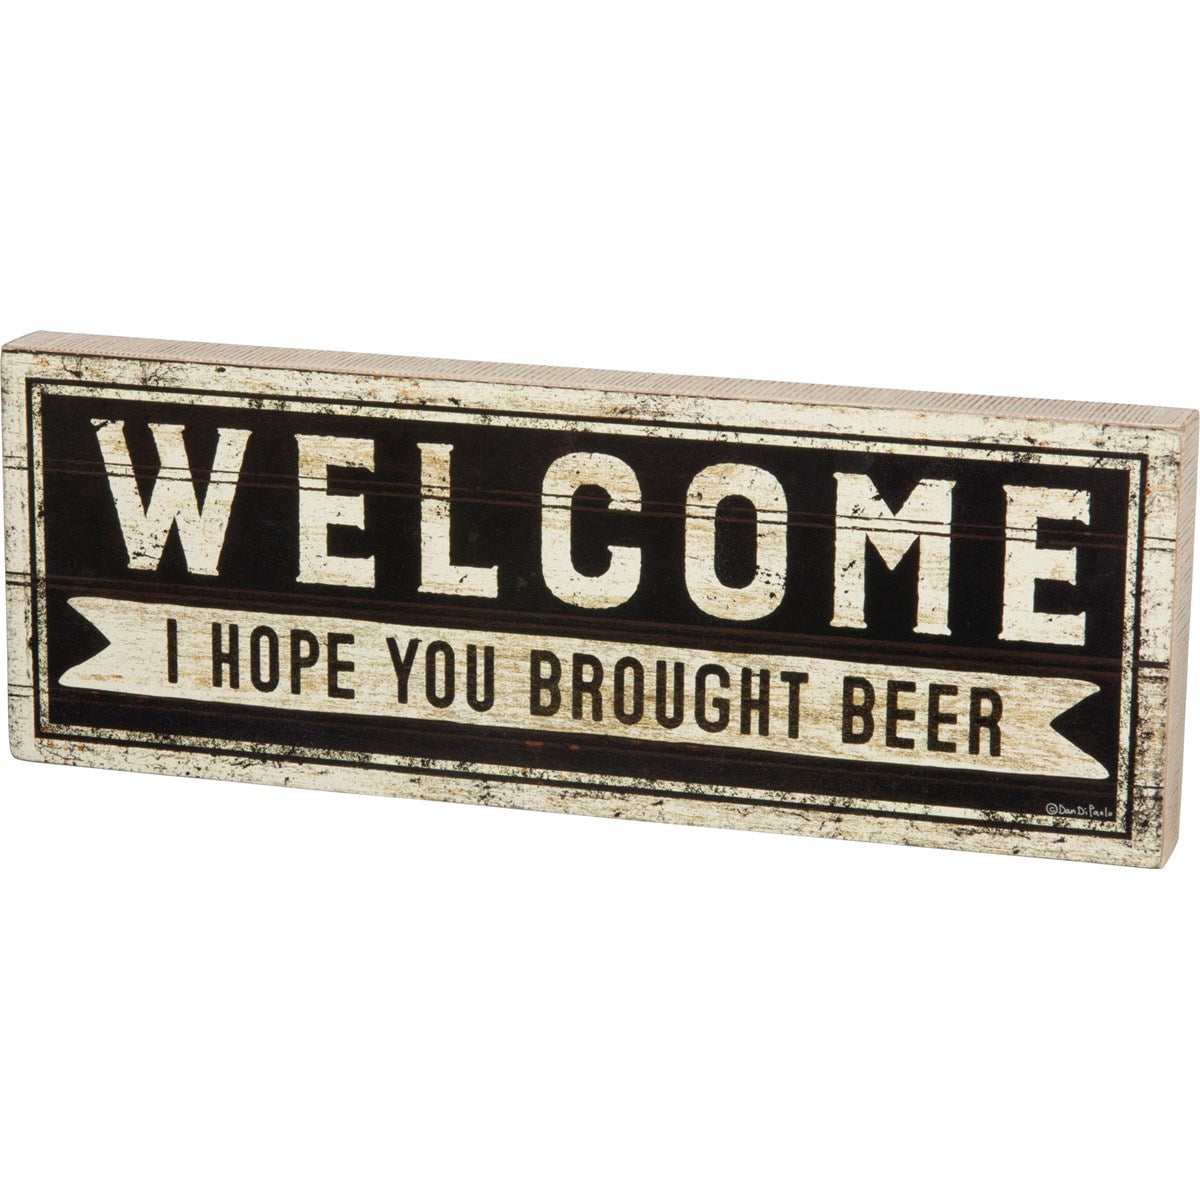 Brought Beer - Sign